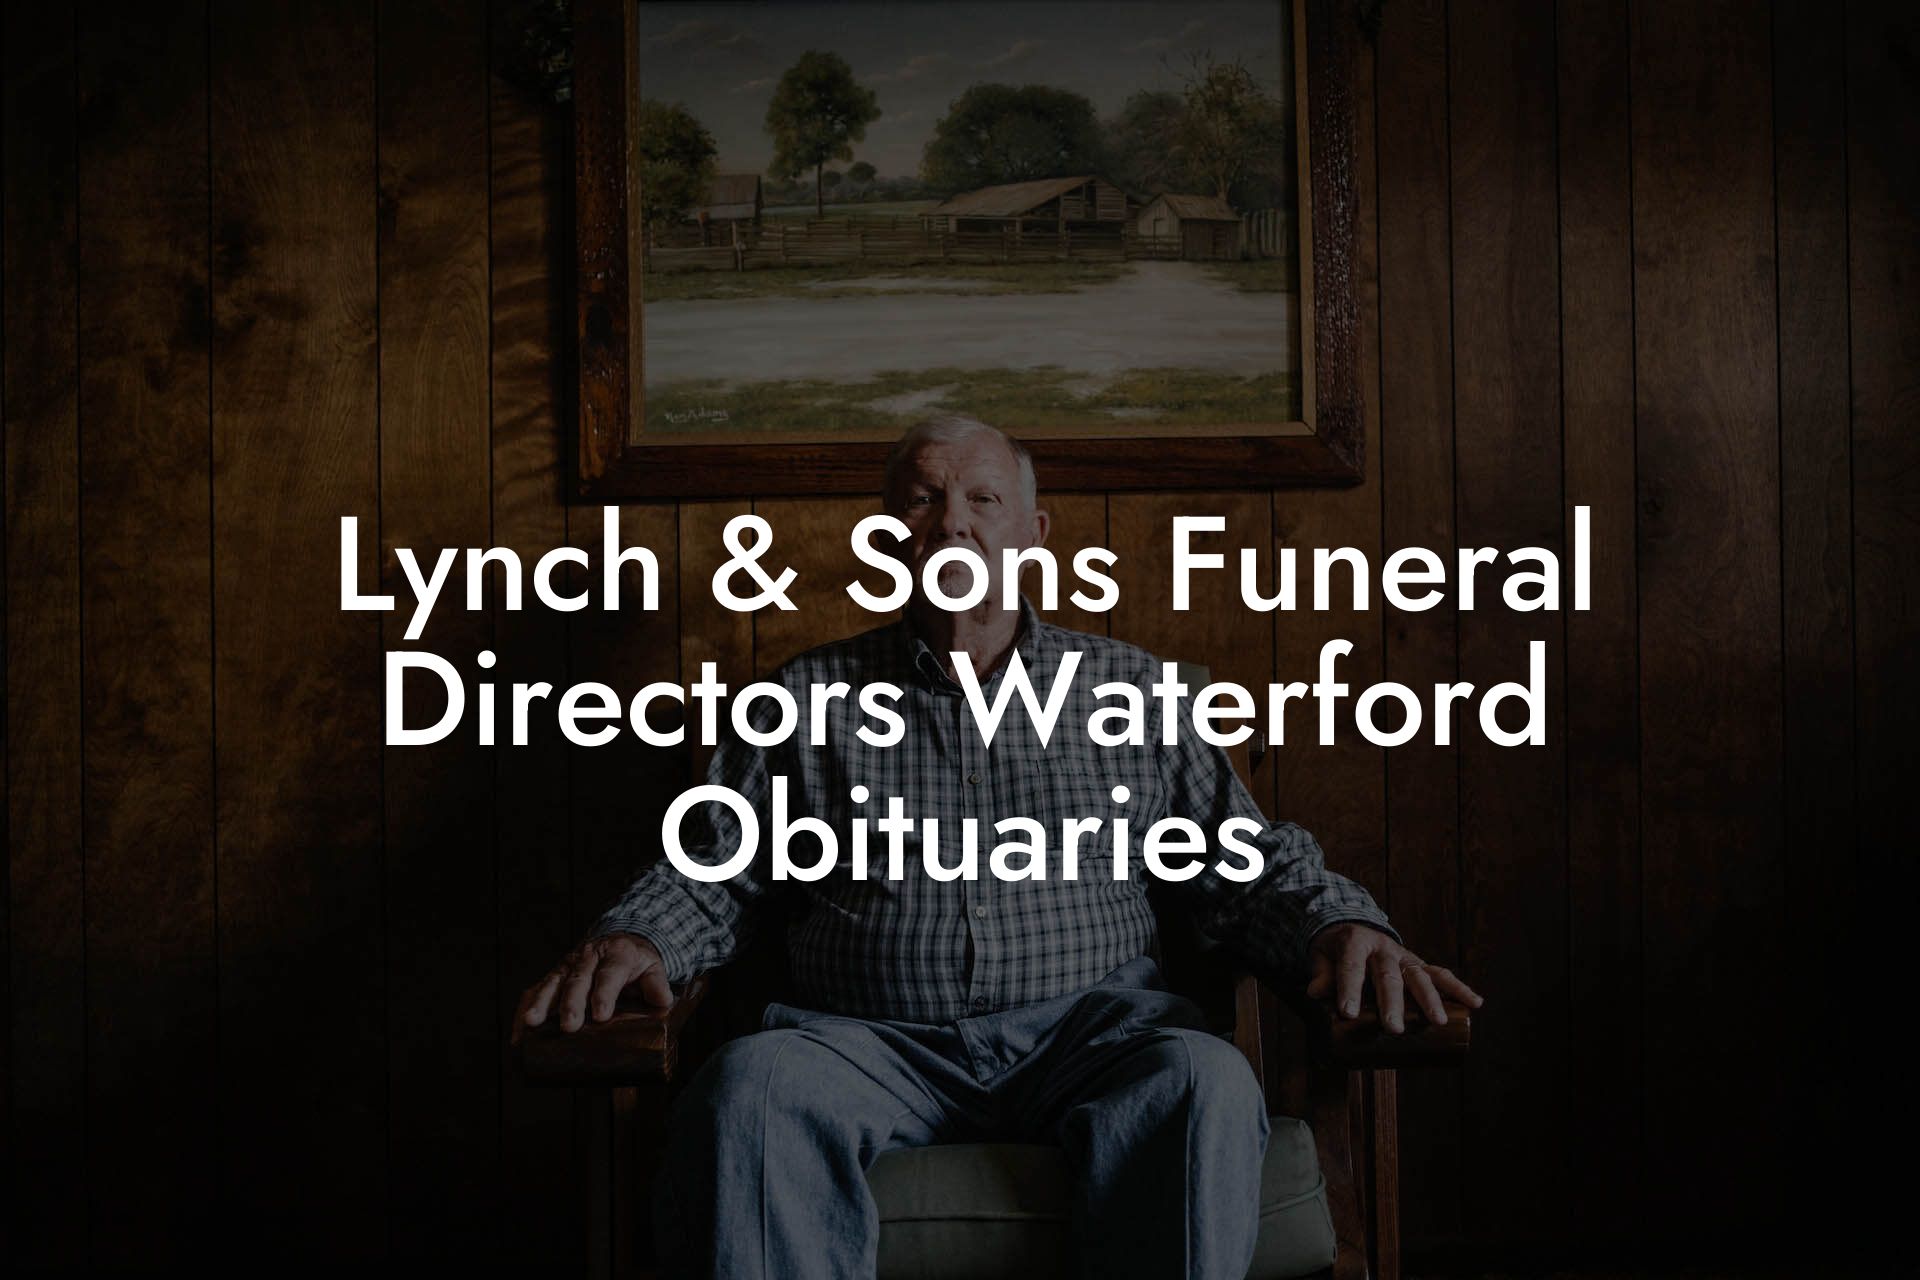 Lynch & Sons Funeral Directors Waterford Obituaries